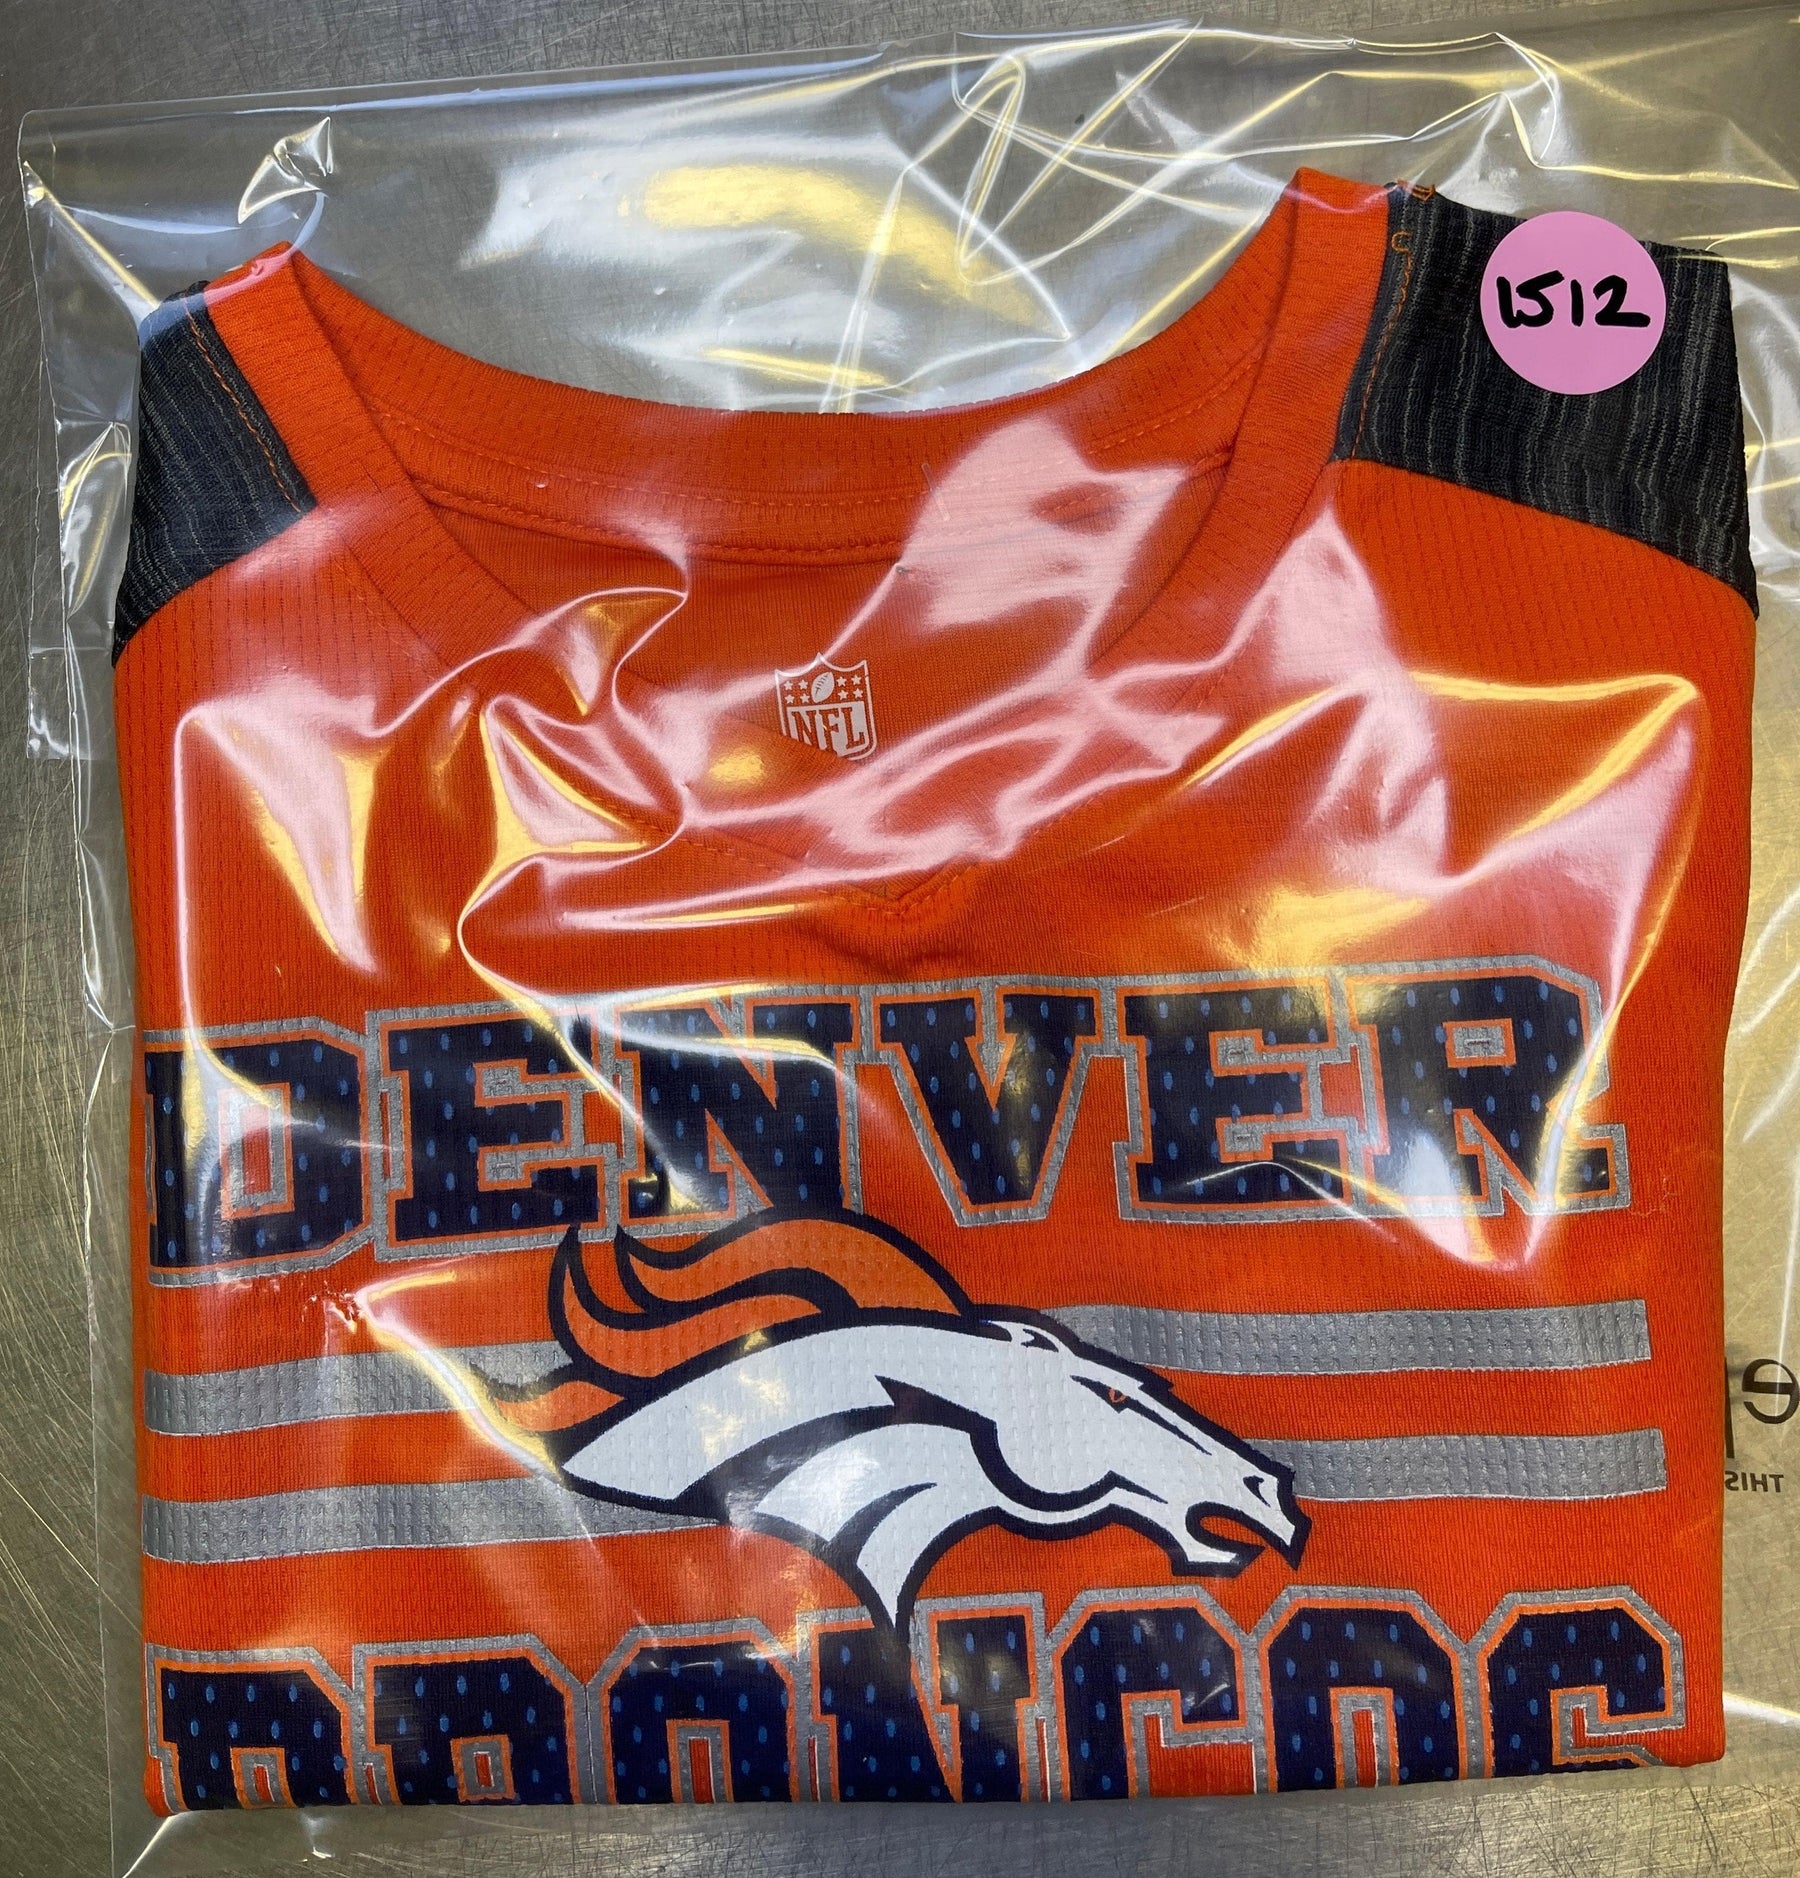 NFL Denver Broncos Orange Jersey-Style T-shirt Youth X-Small 4-5